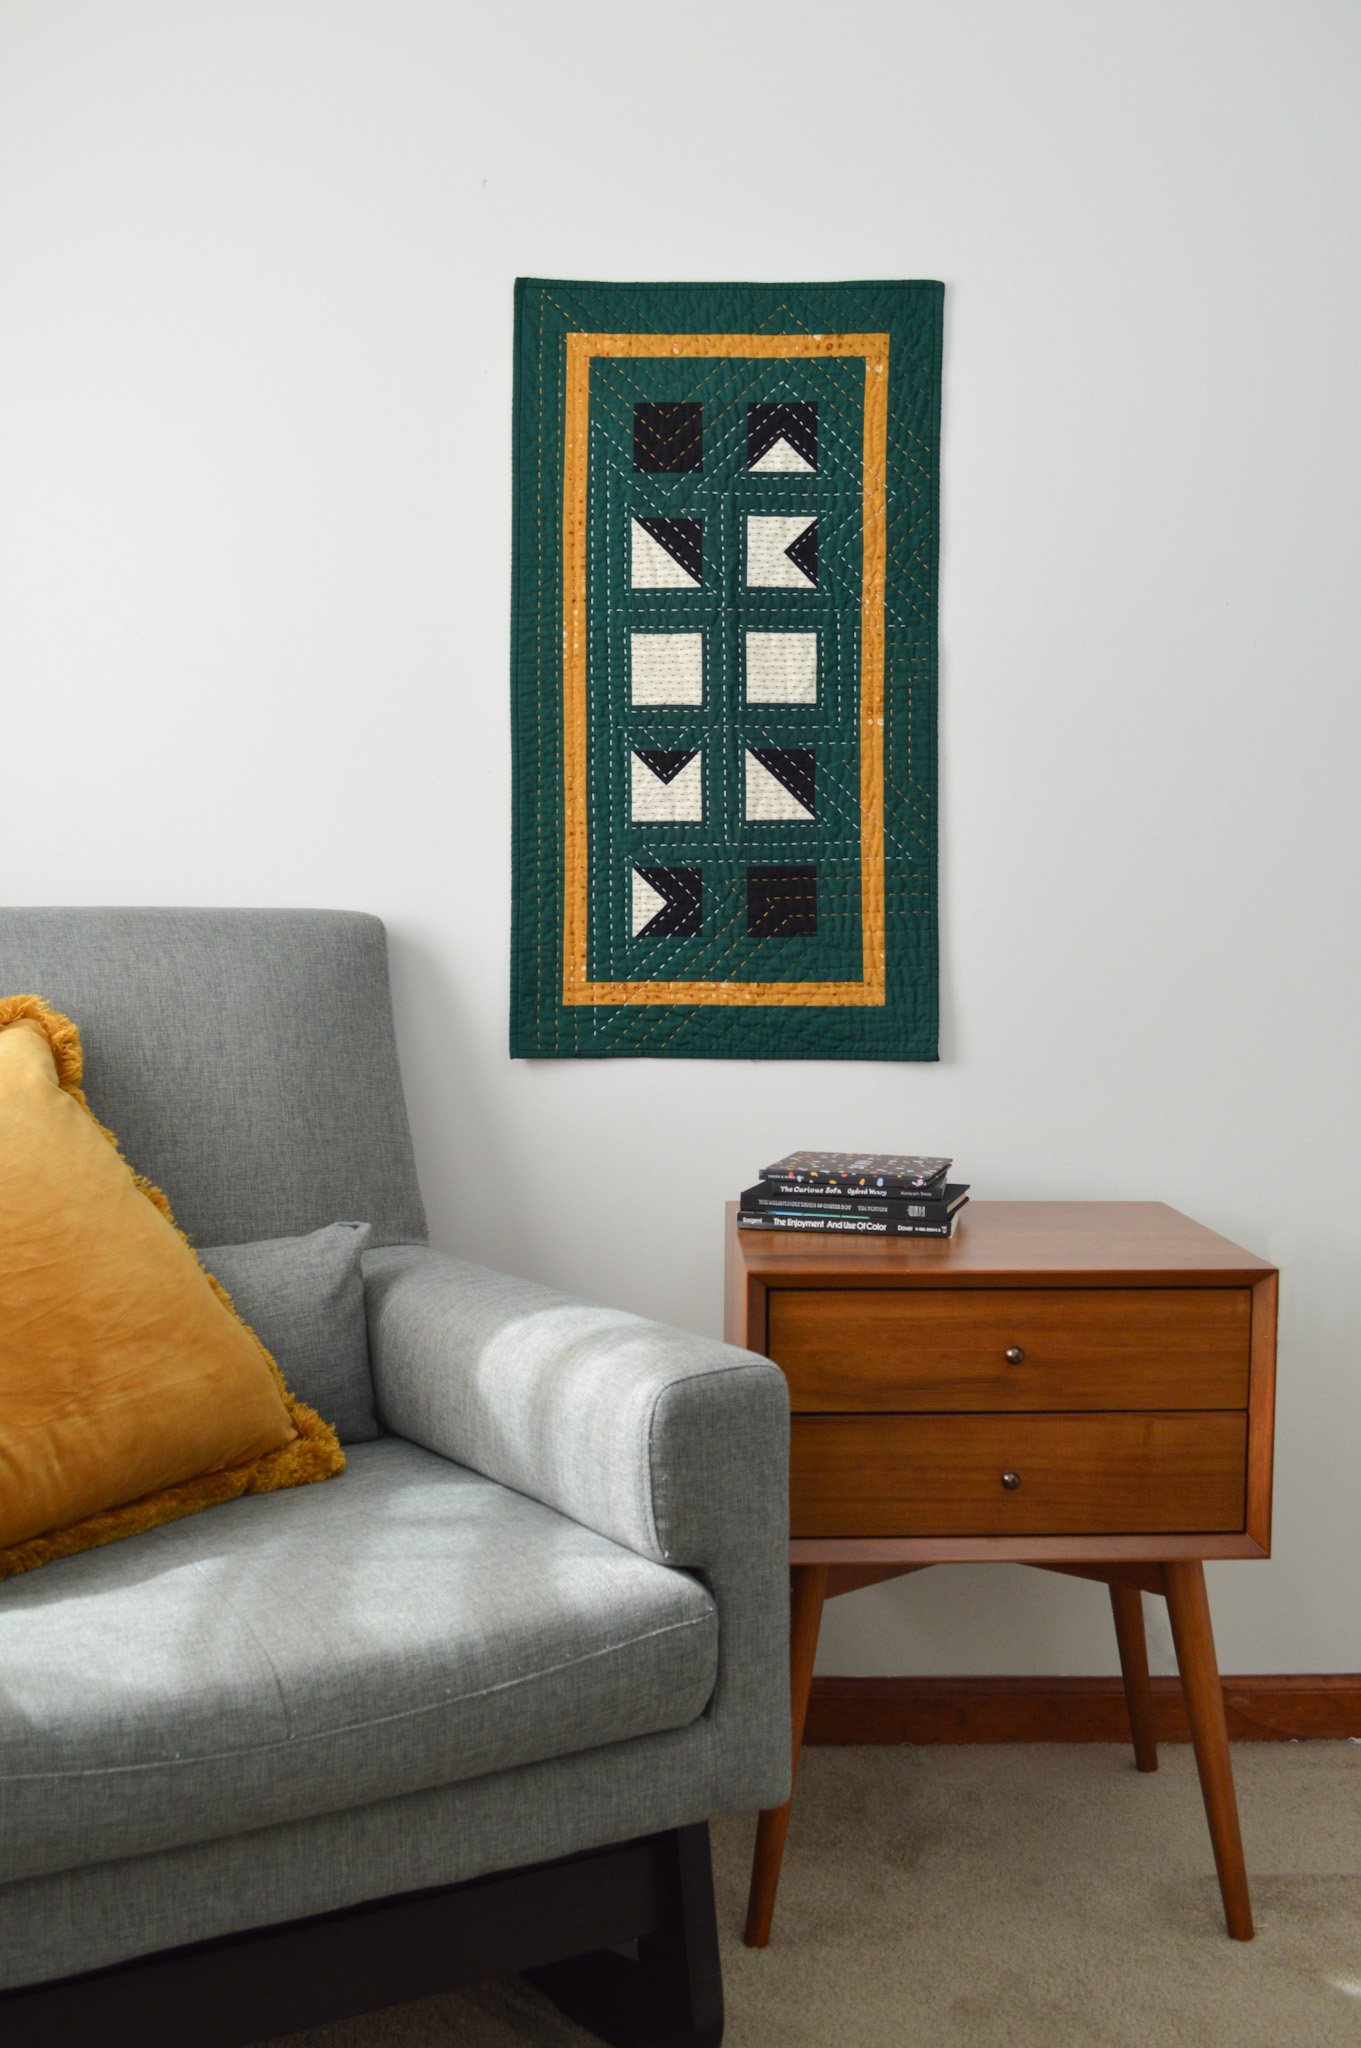  a green. hand quilted mini quilt hanging on a wall in a modern sitting corner 